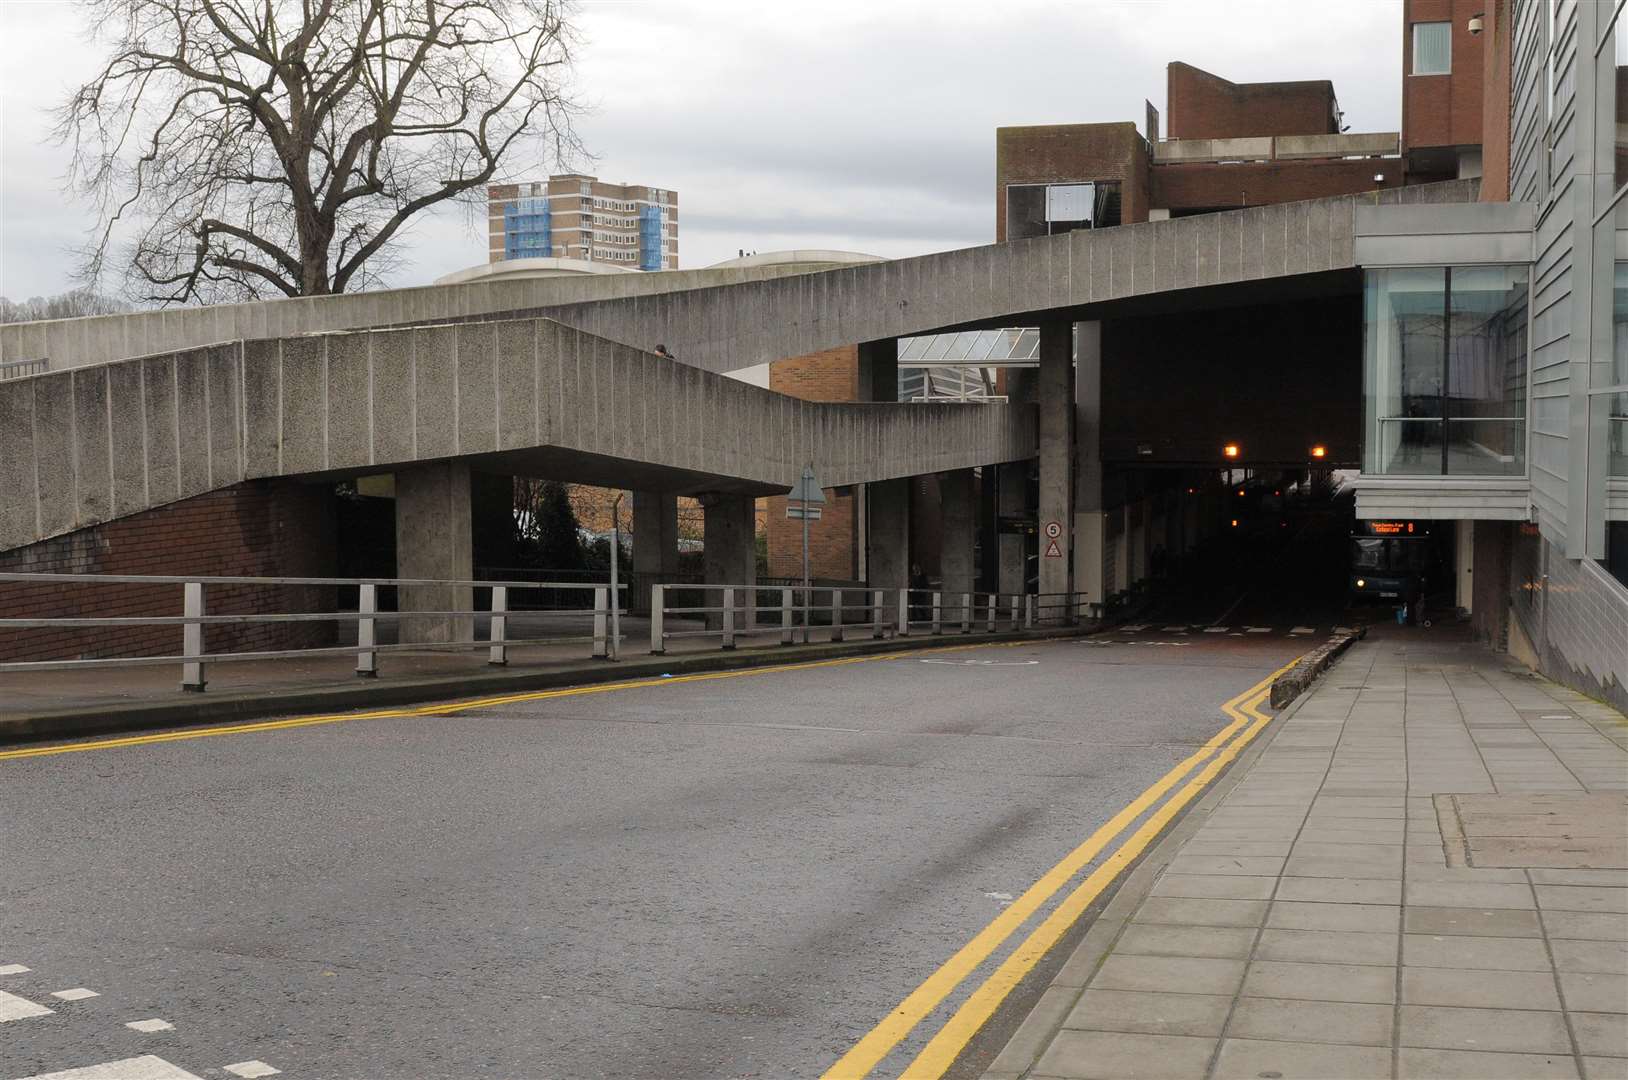 Maidstone Bus Station as it currently stands Picture: Steve Crispe